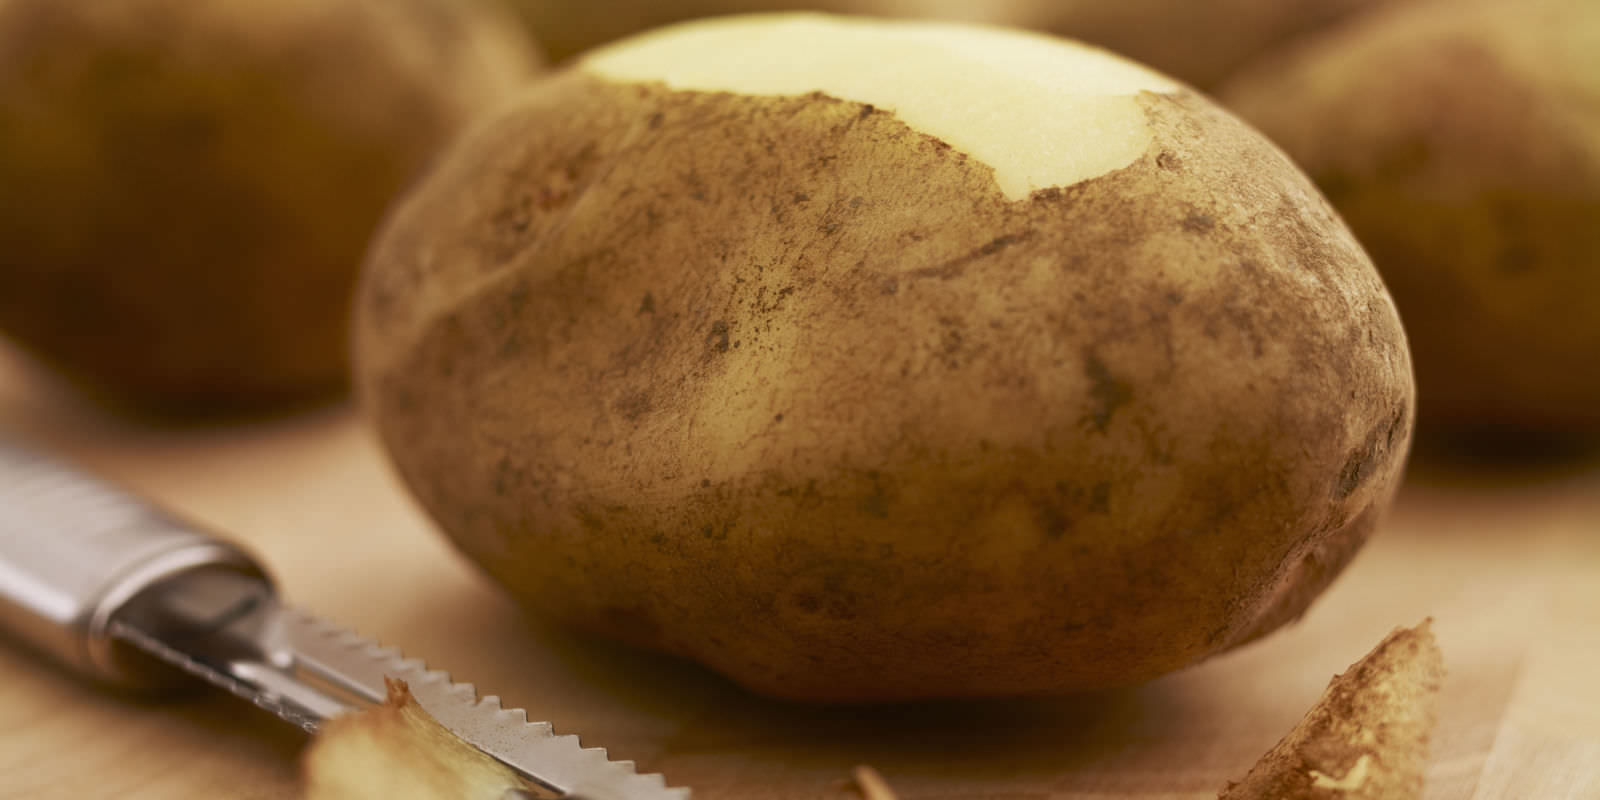 All your life you have peeled potatoes incorrectly - watch this ingenious trick by a master chef